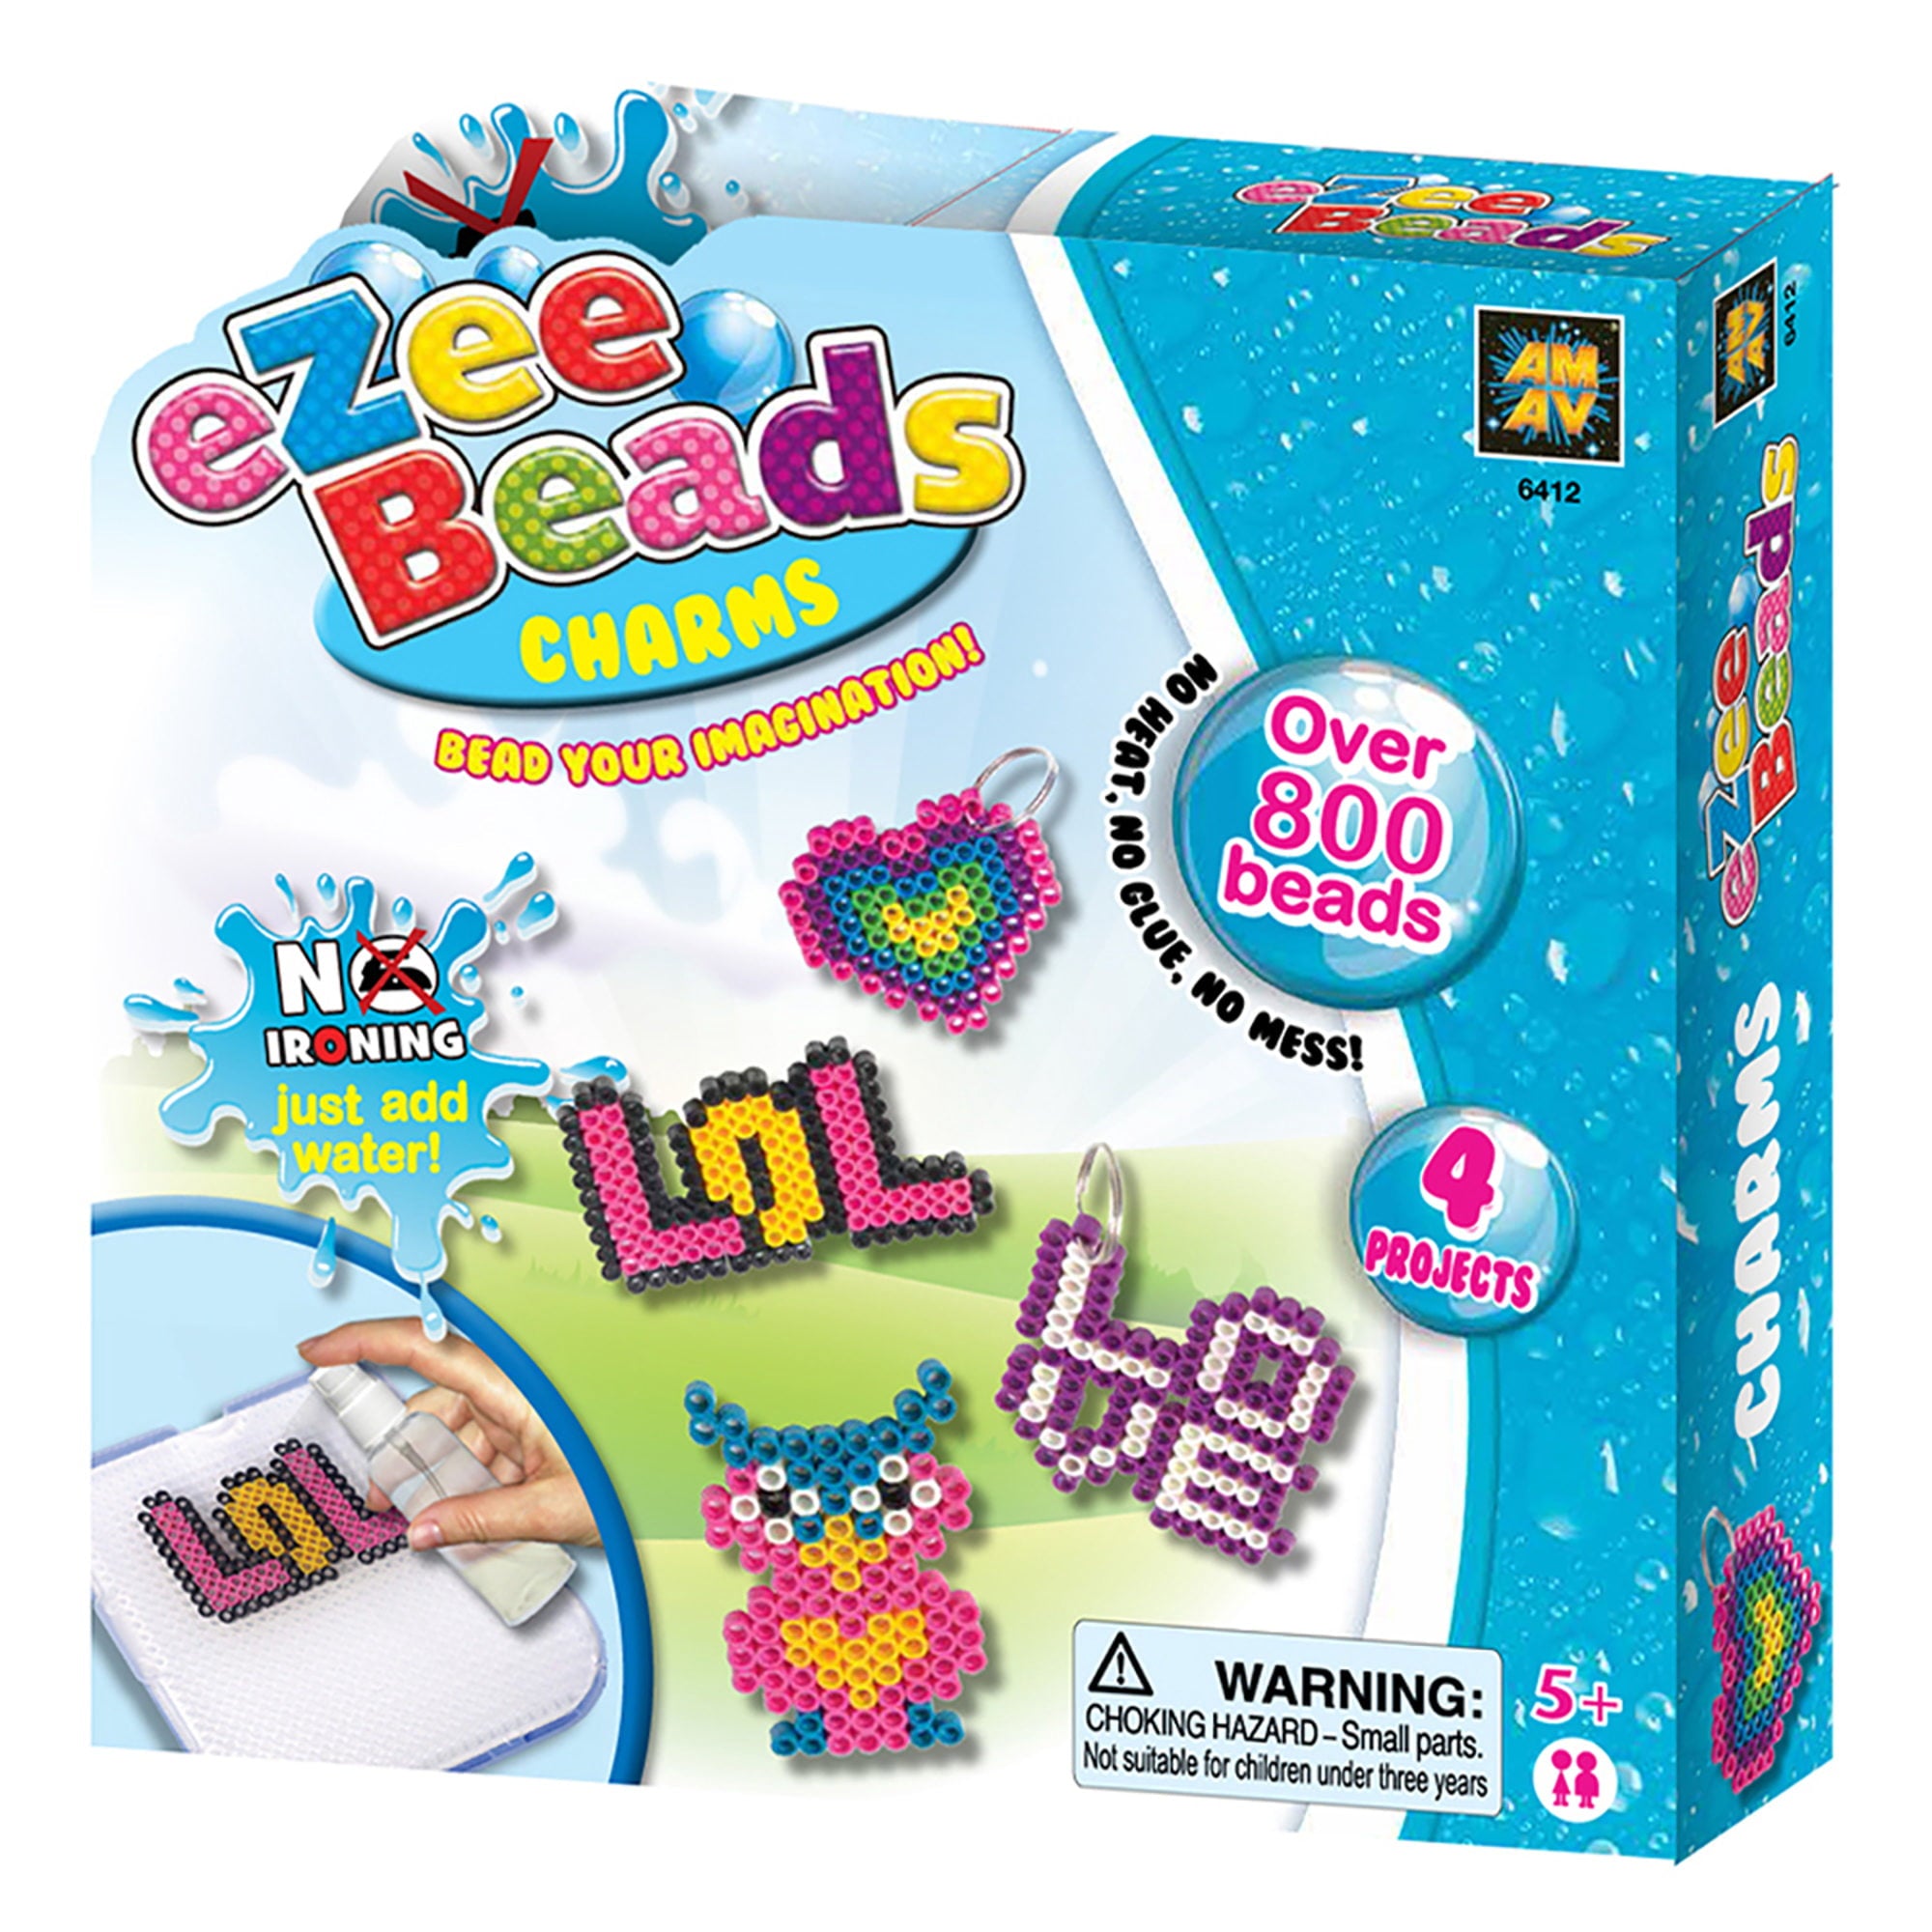 AMAV EZ Beads Charms-800 Beads Set, Craft Kit to Create Fun and Easy Bead Projects, Children Ages 5 and Up